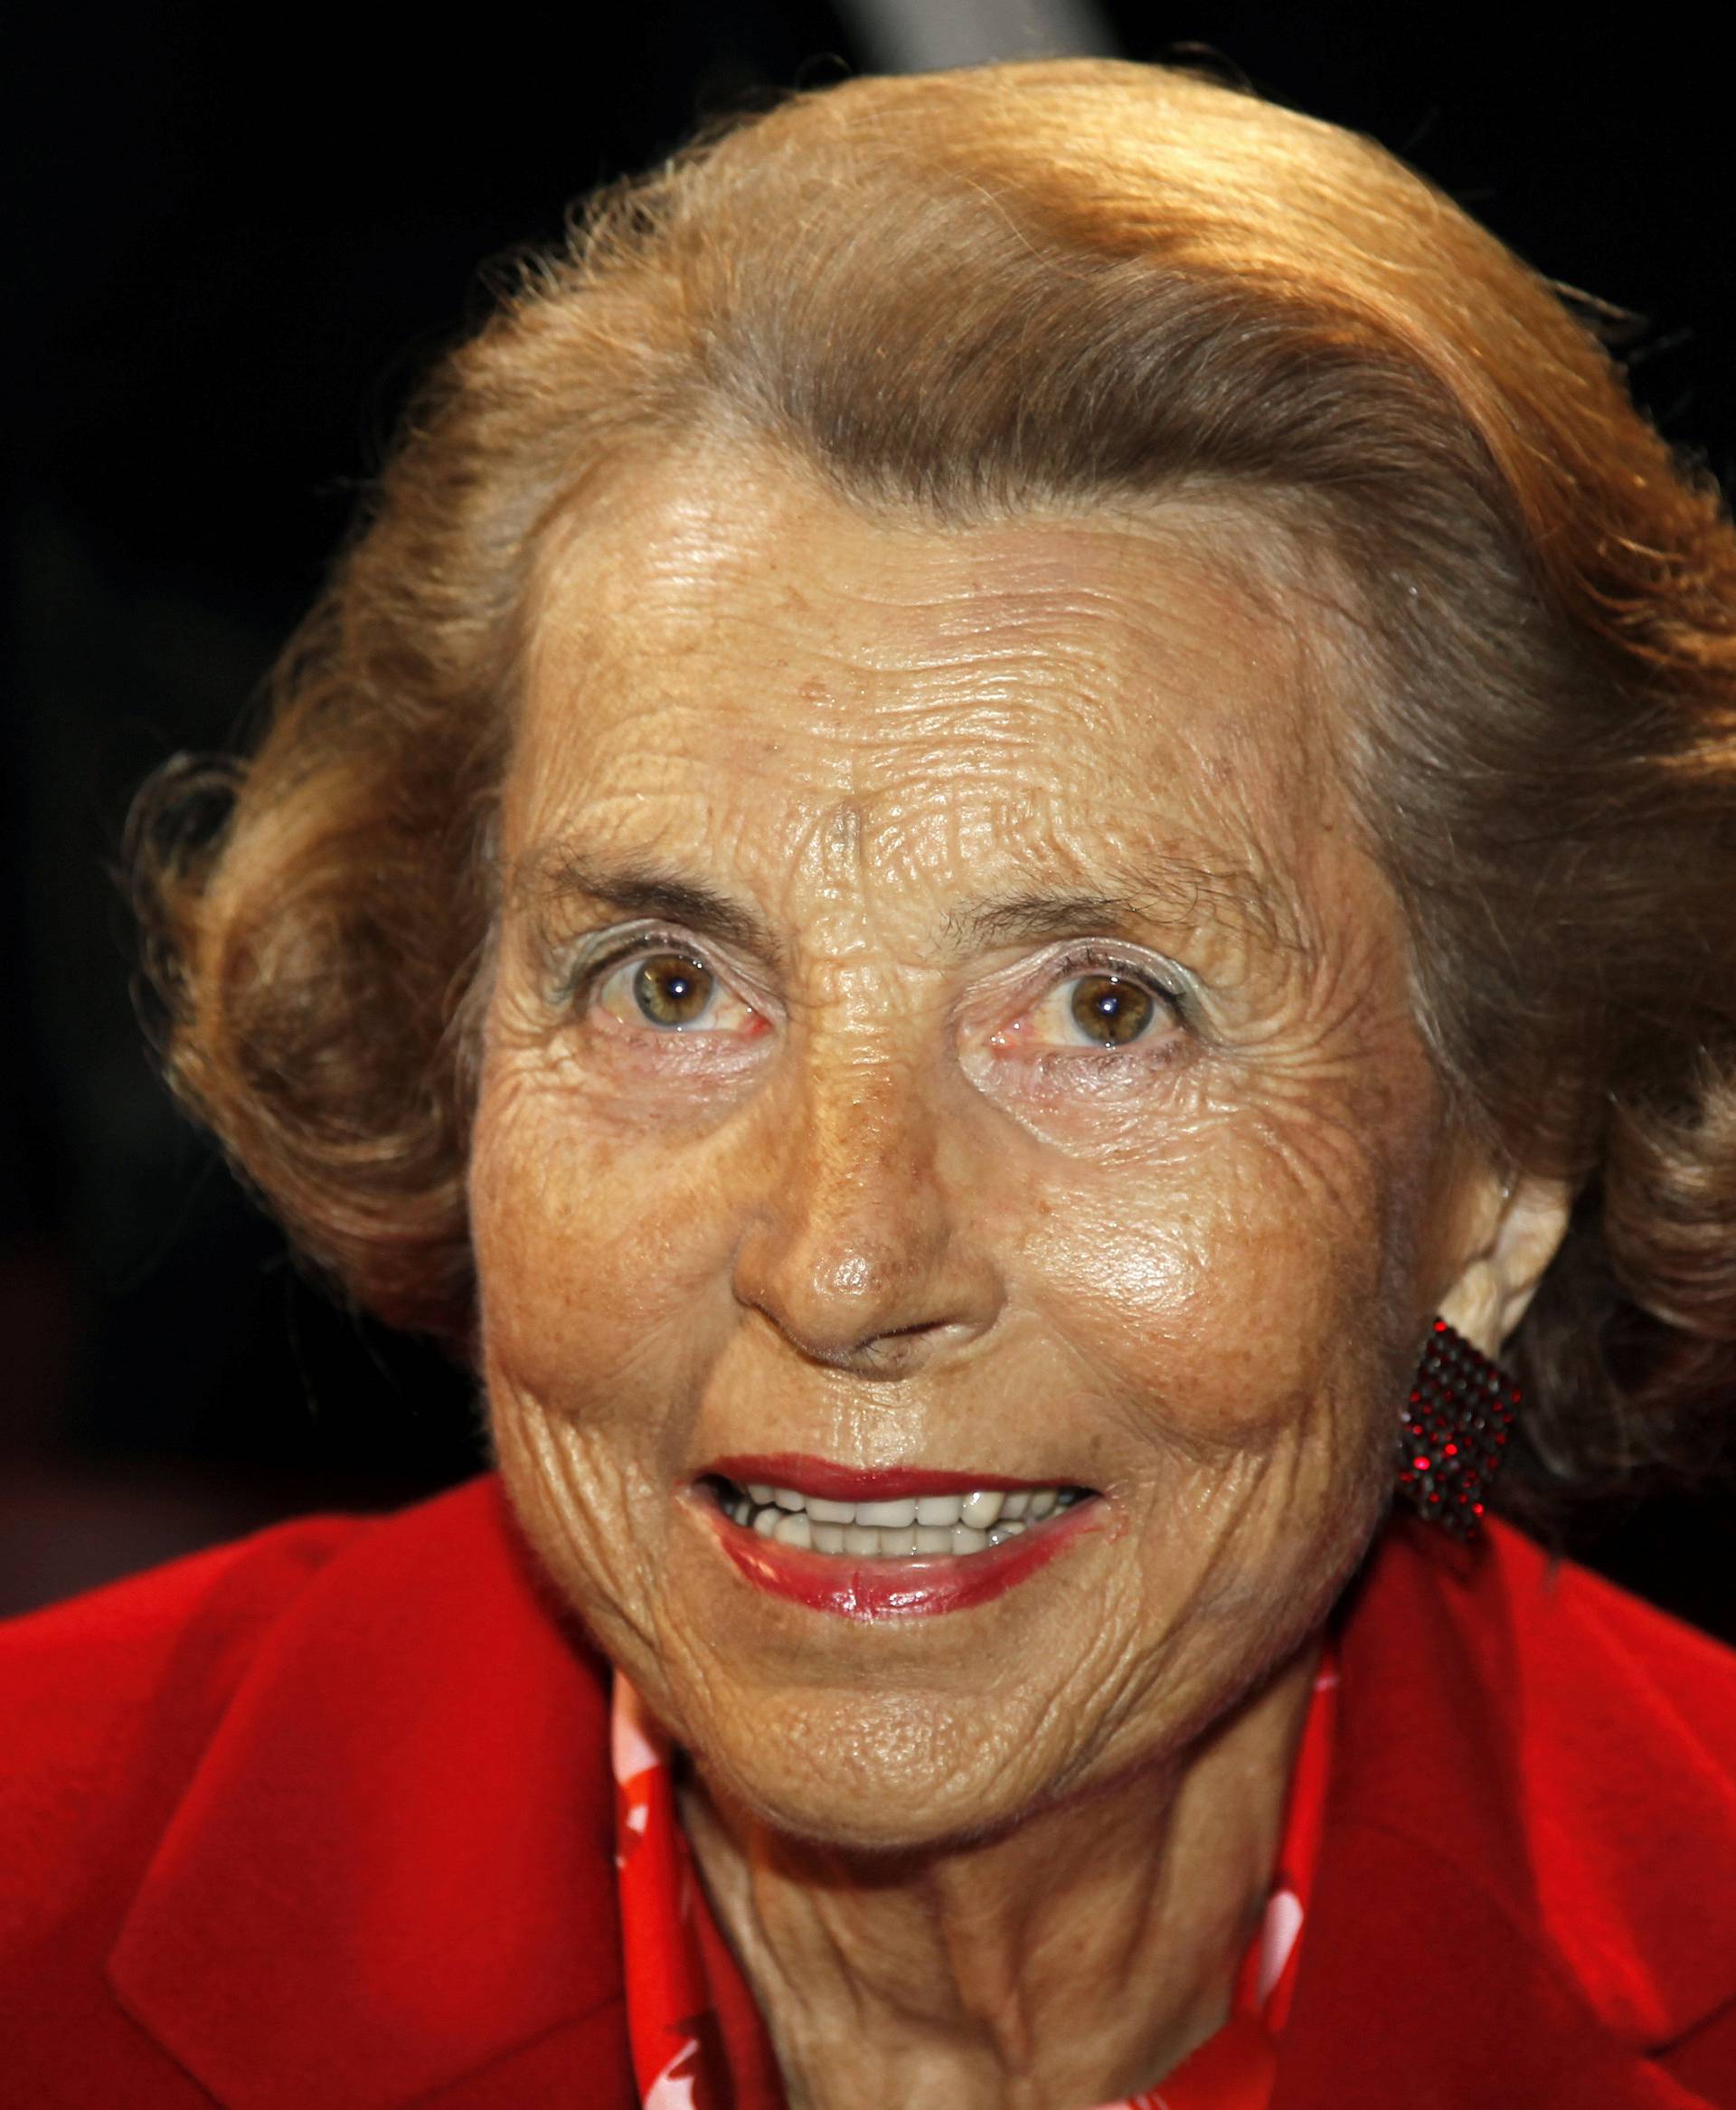 FILE PHOTO: Liliane Bettencourt, heiress to the L'Oreal fortune, attends French designer Franck Sorbier's Haute Couture Spring-Summer 2011 fashion show in Paris